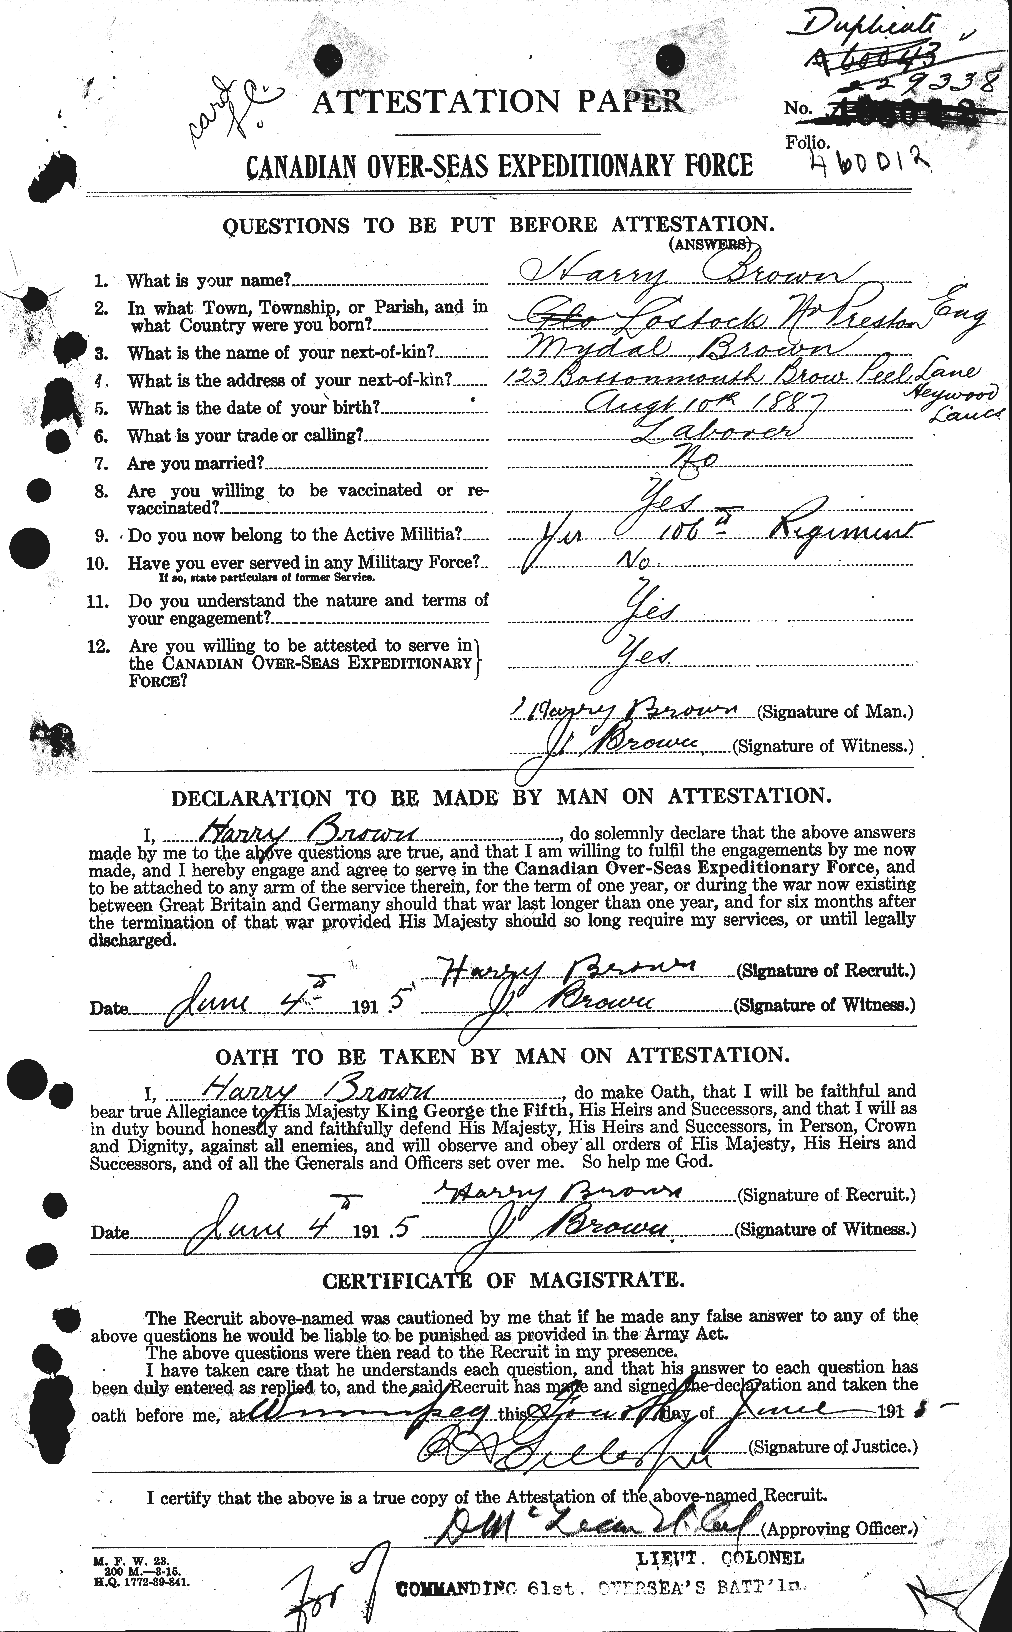 Personnel Records of the First World War - CEF 265411a